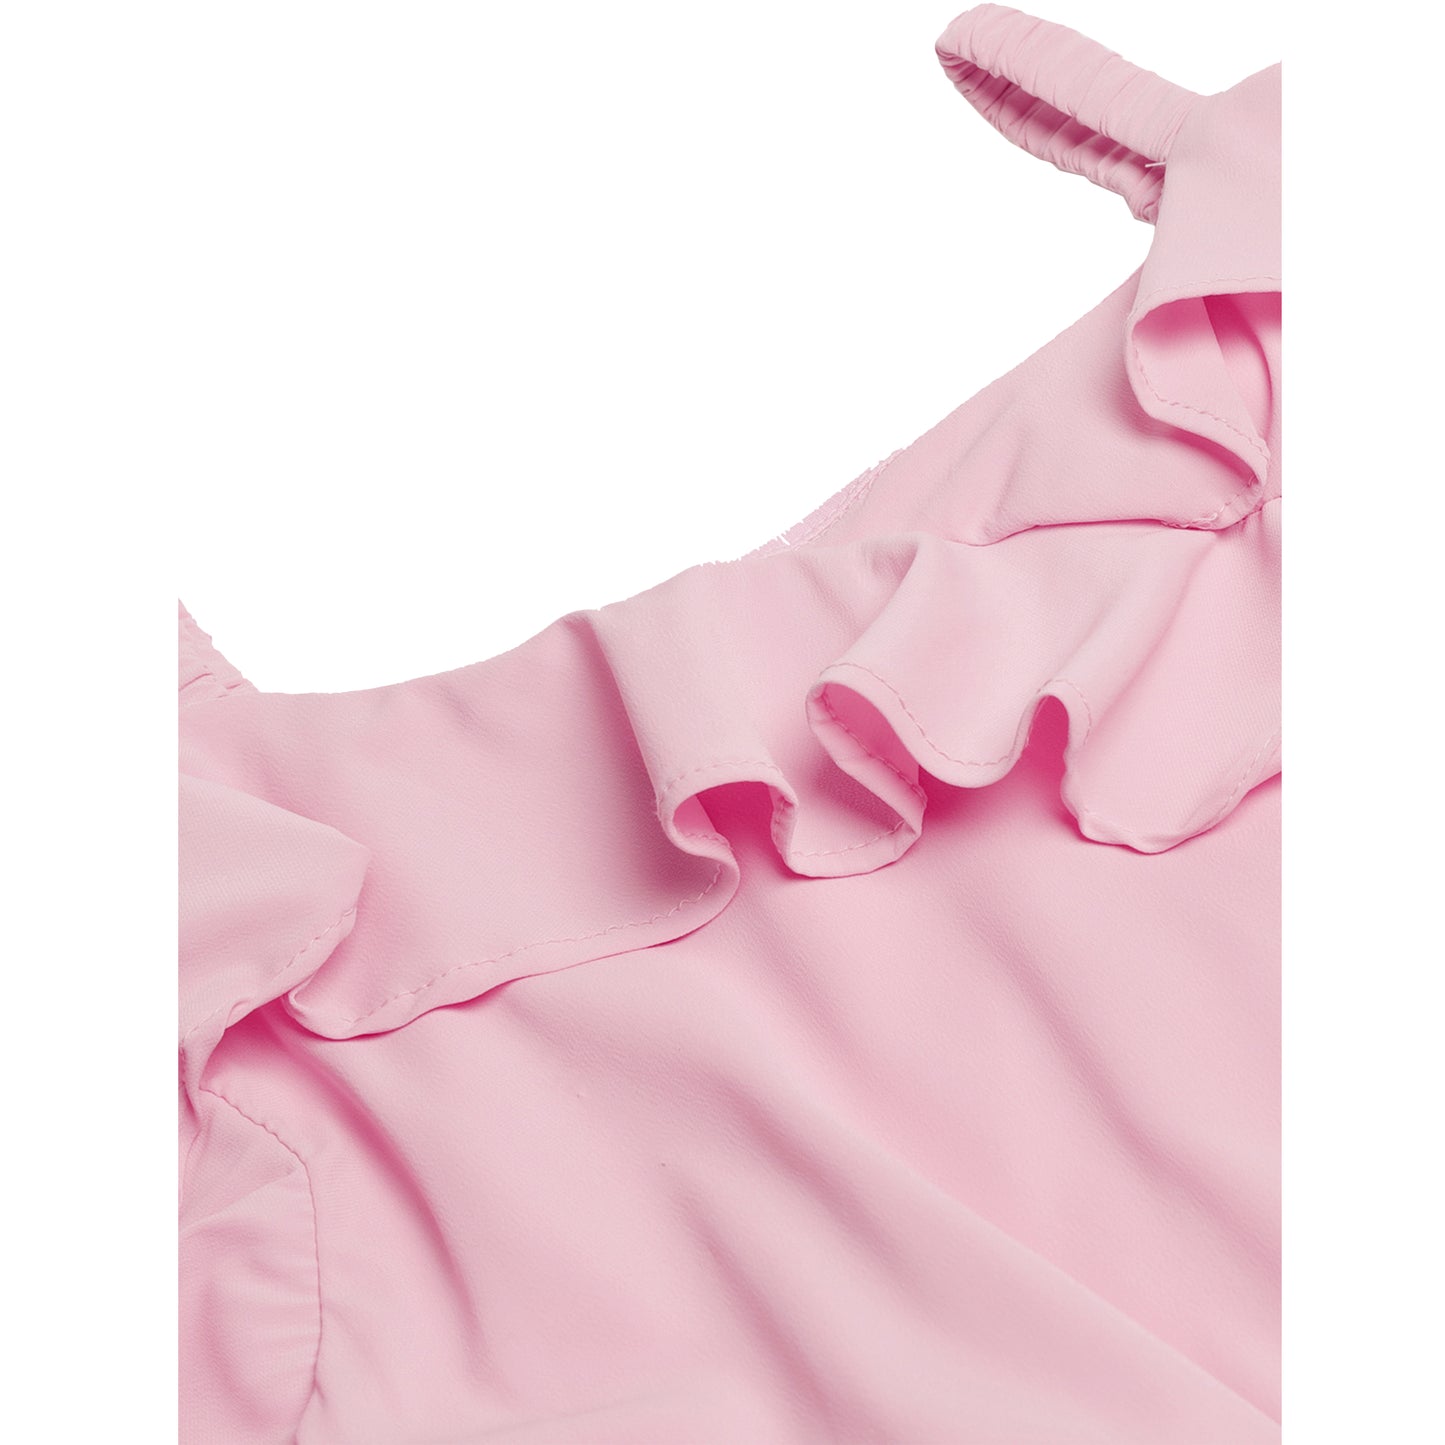 Pink Ruffle Top With Cold Sleeves With Parrot Broach Detail